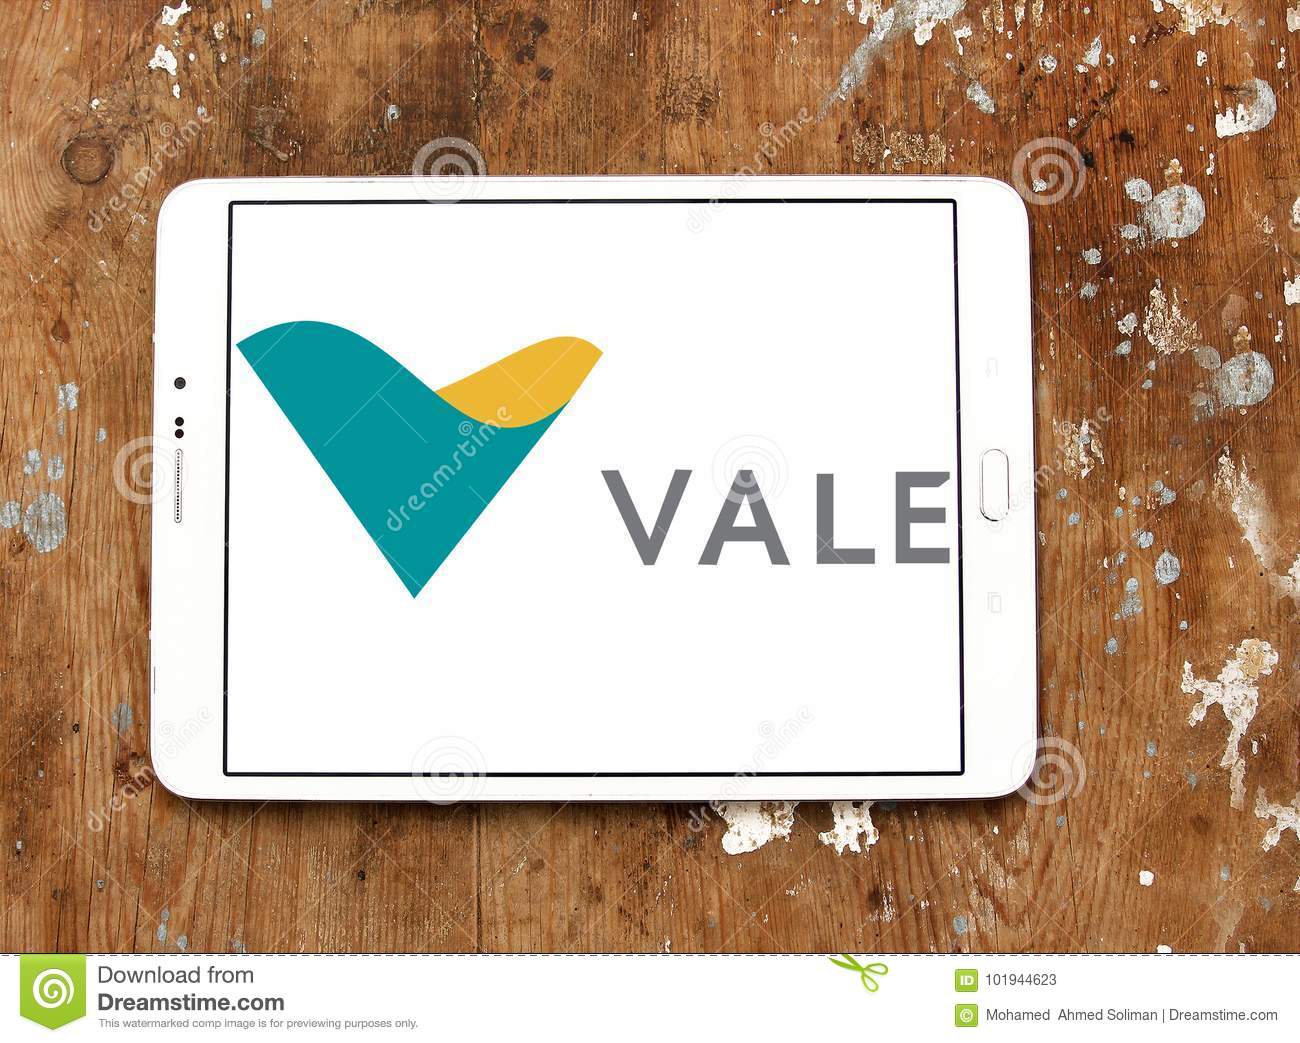 Logo Vale Company Samsung Tablet Wooden Background Brazilian Multinational Corporation Engaged Metals Mining One 101944623